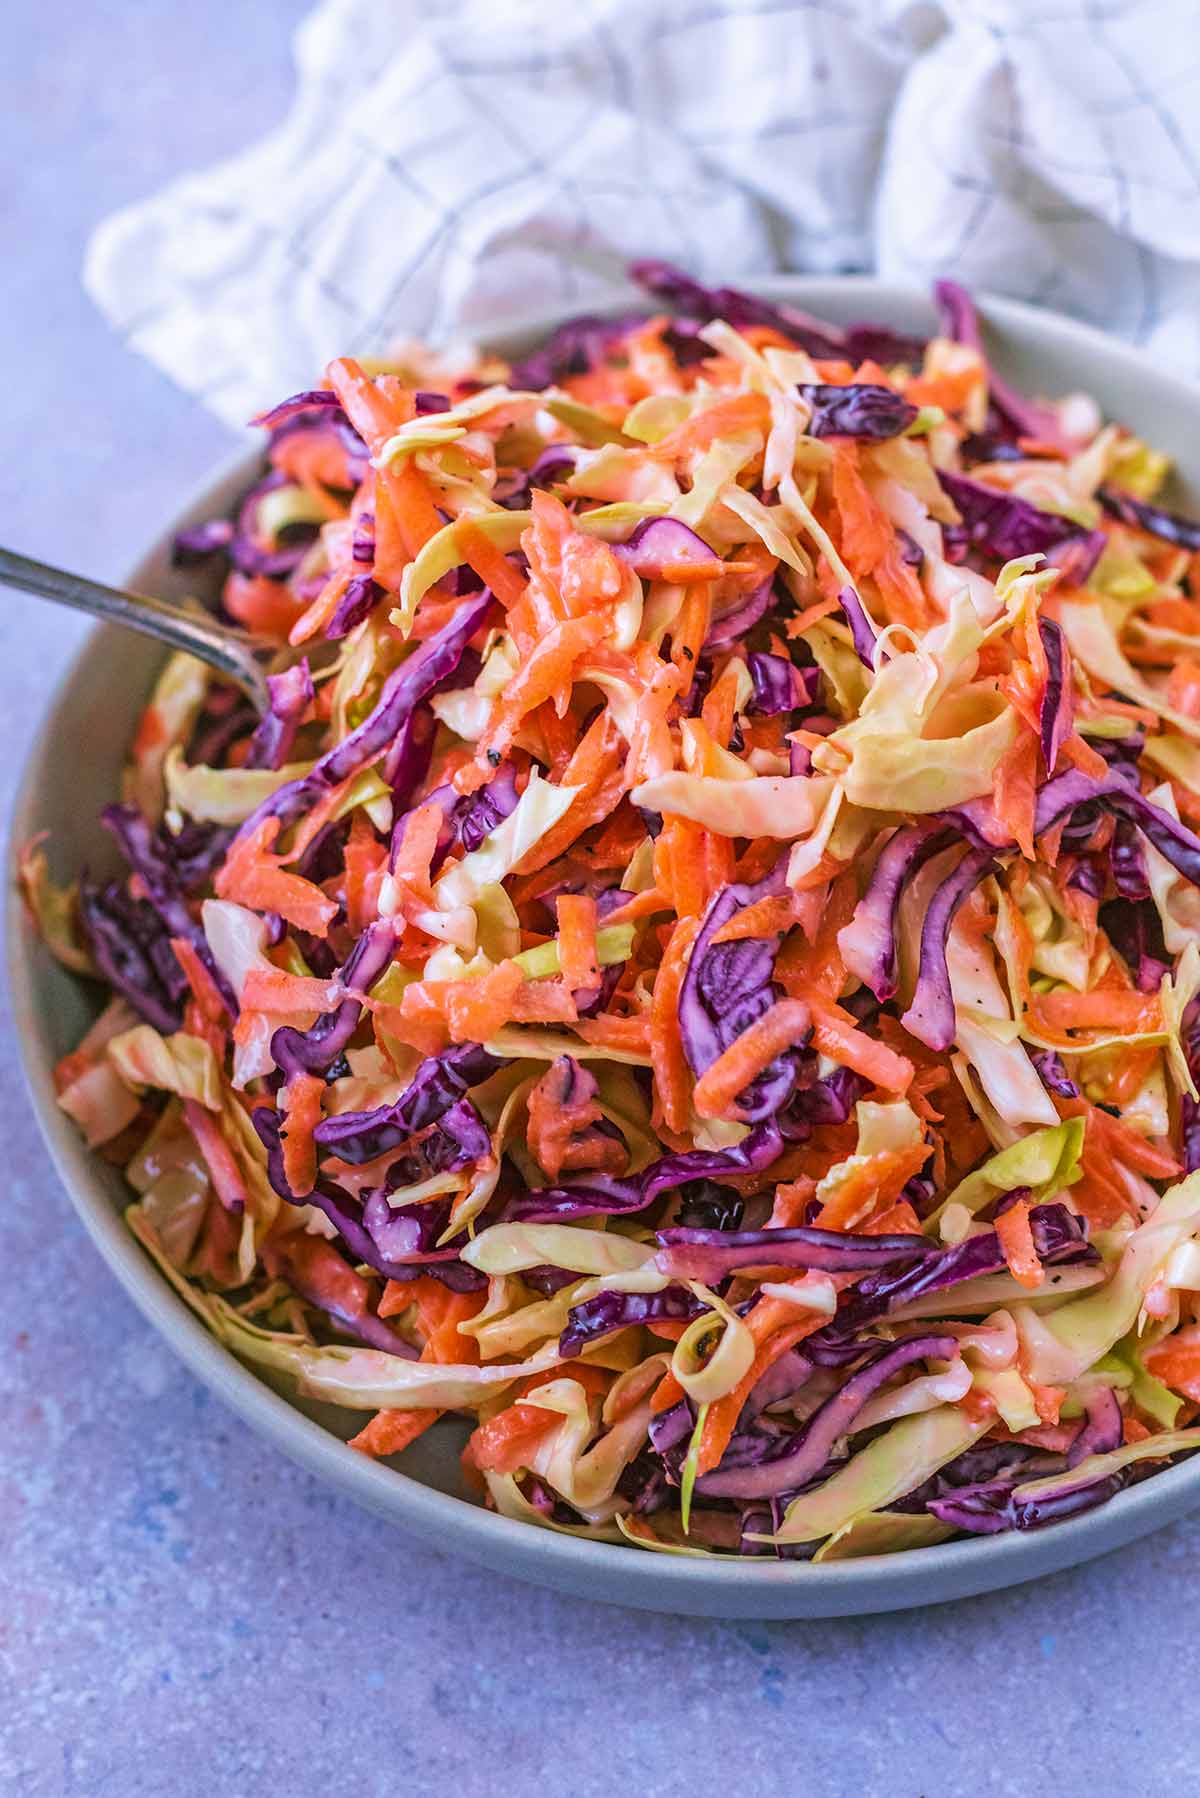 A fork lifting some coleslaw from a bowl.